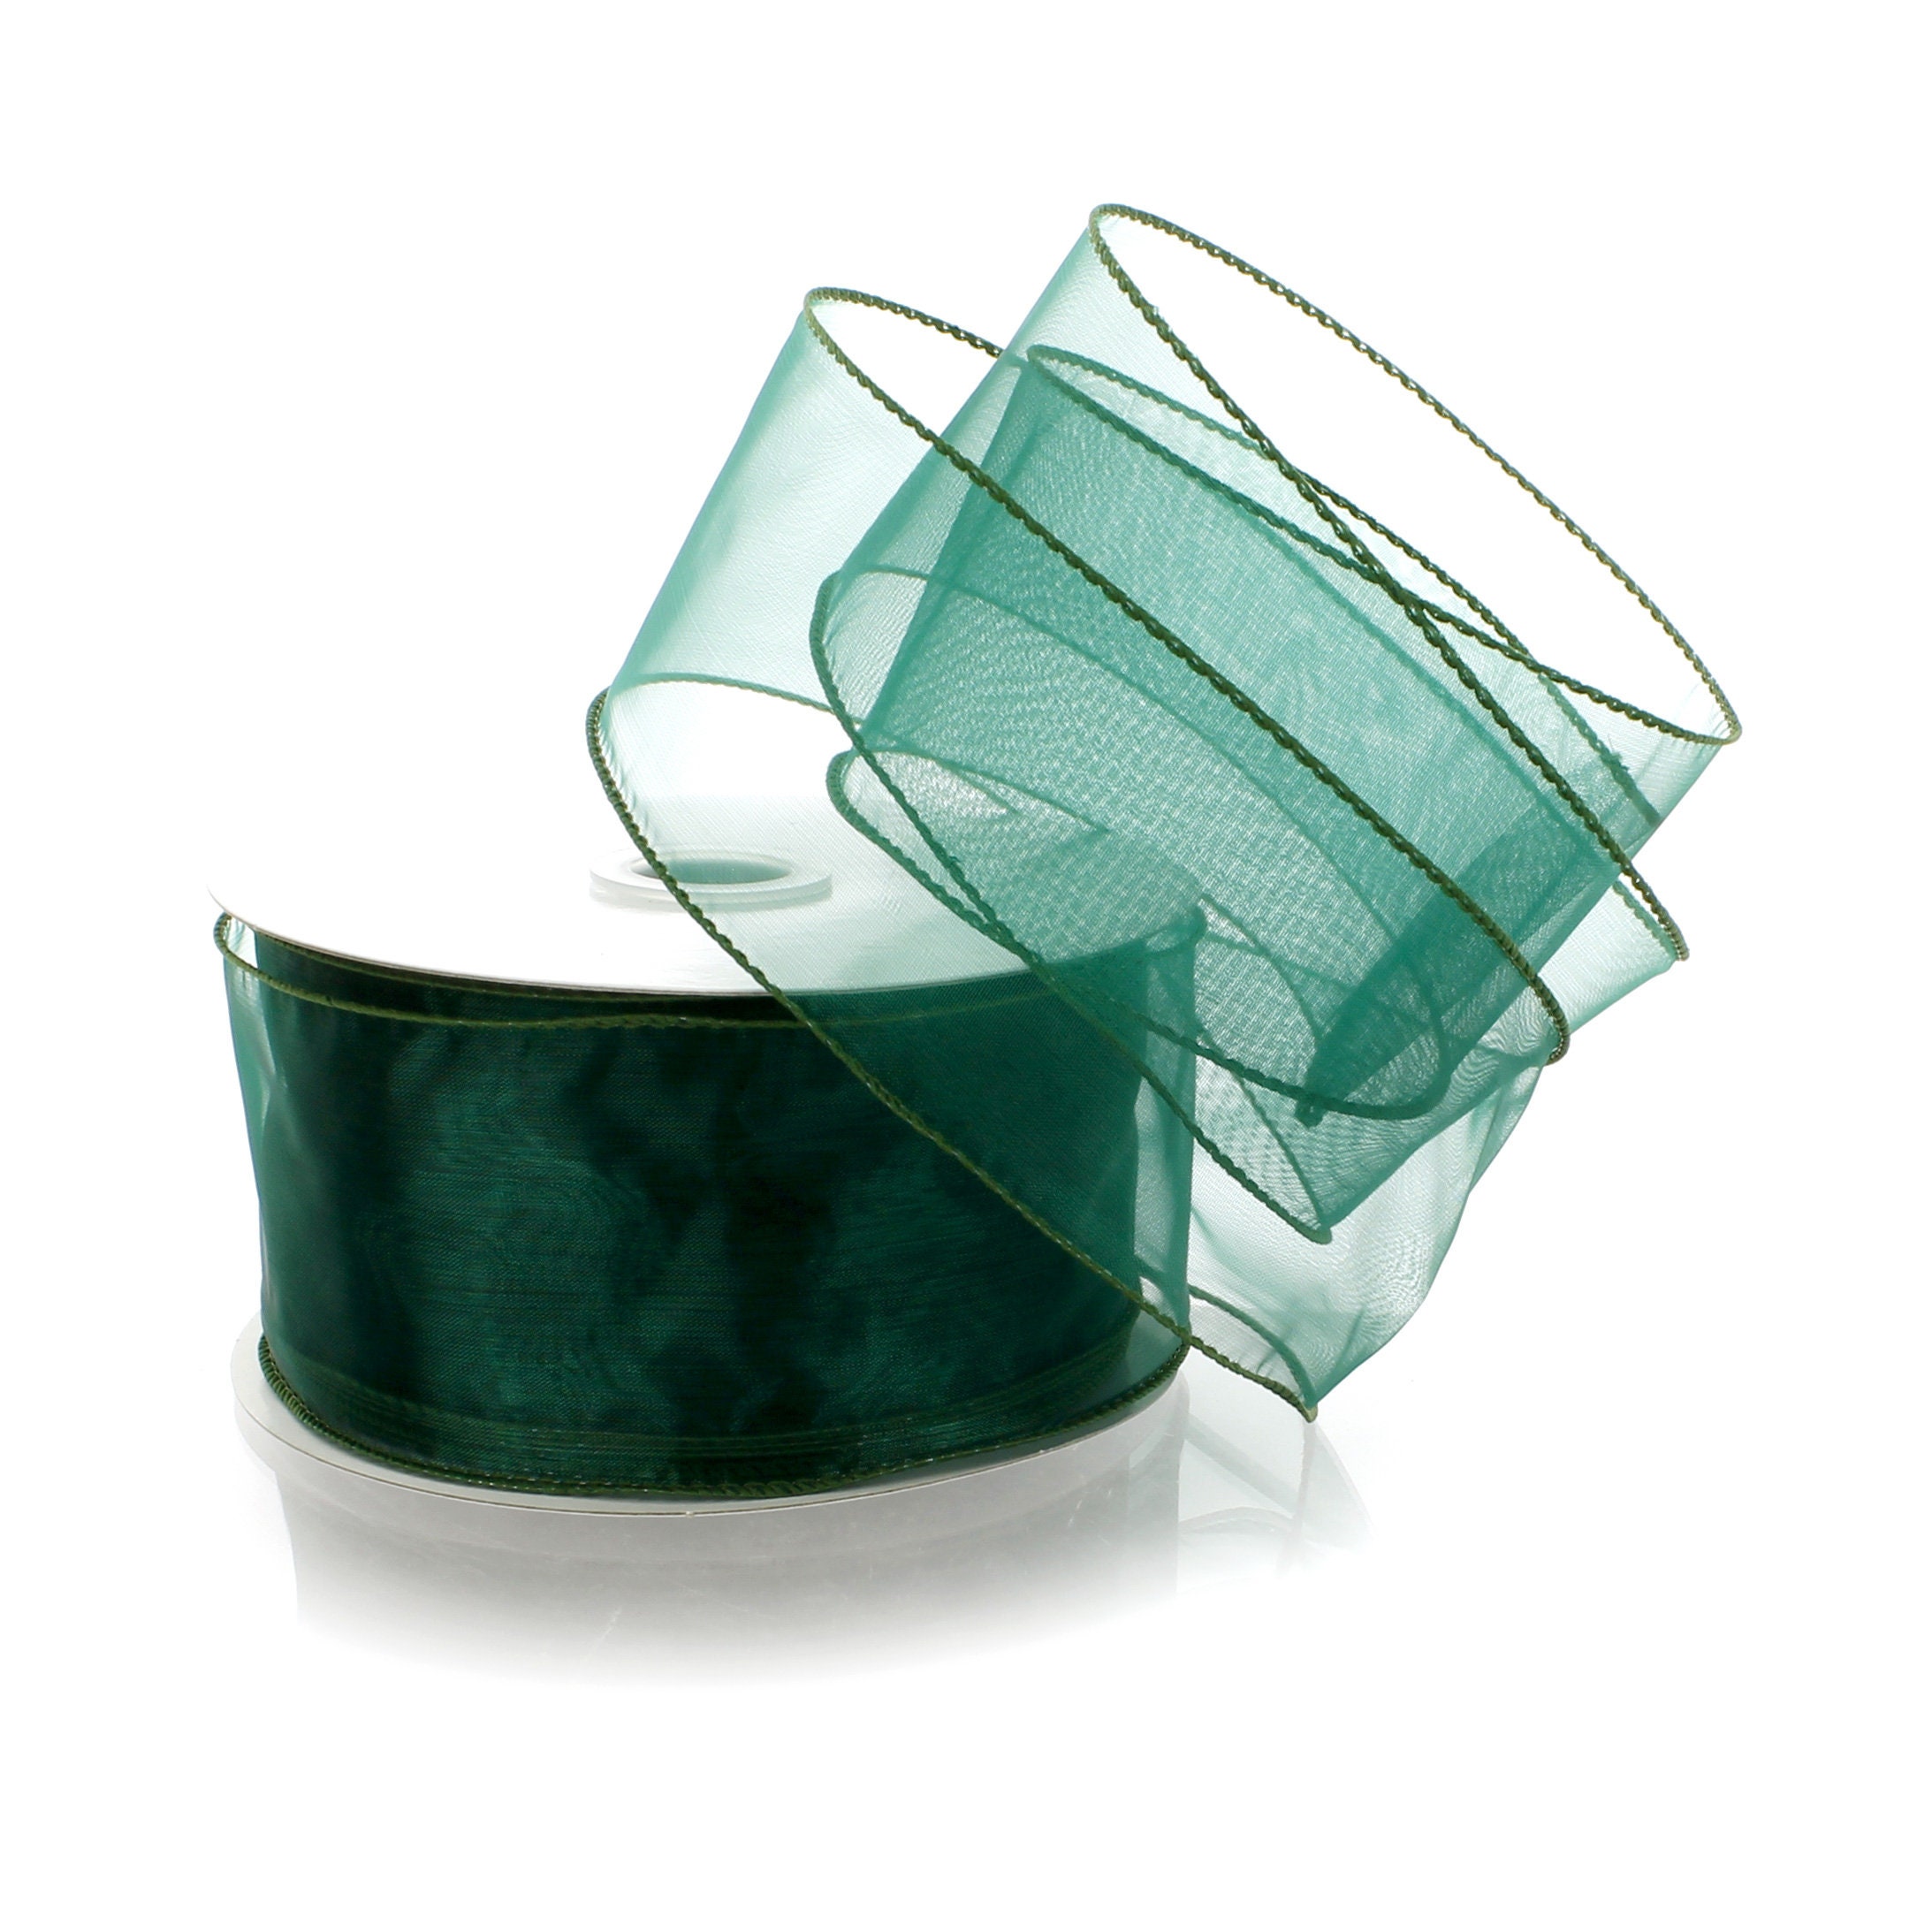 Tranquil Green Sheer Organza Ribbon with Satin Edges, 40mm (1 9/16in) wide  *Sold Per Metre*